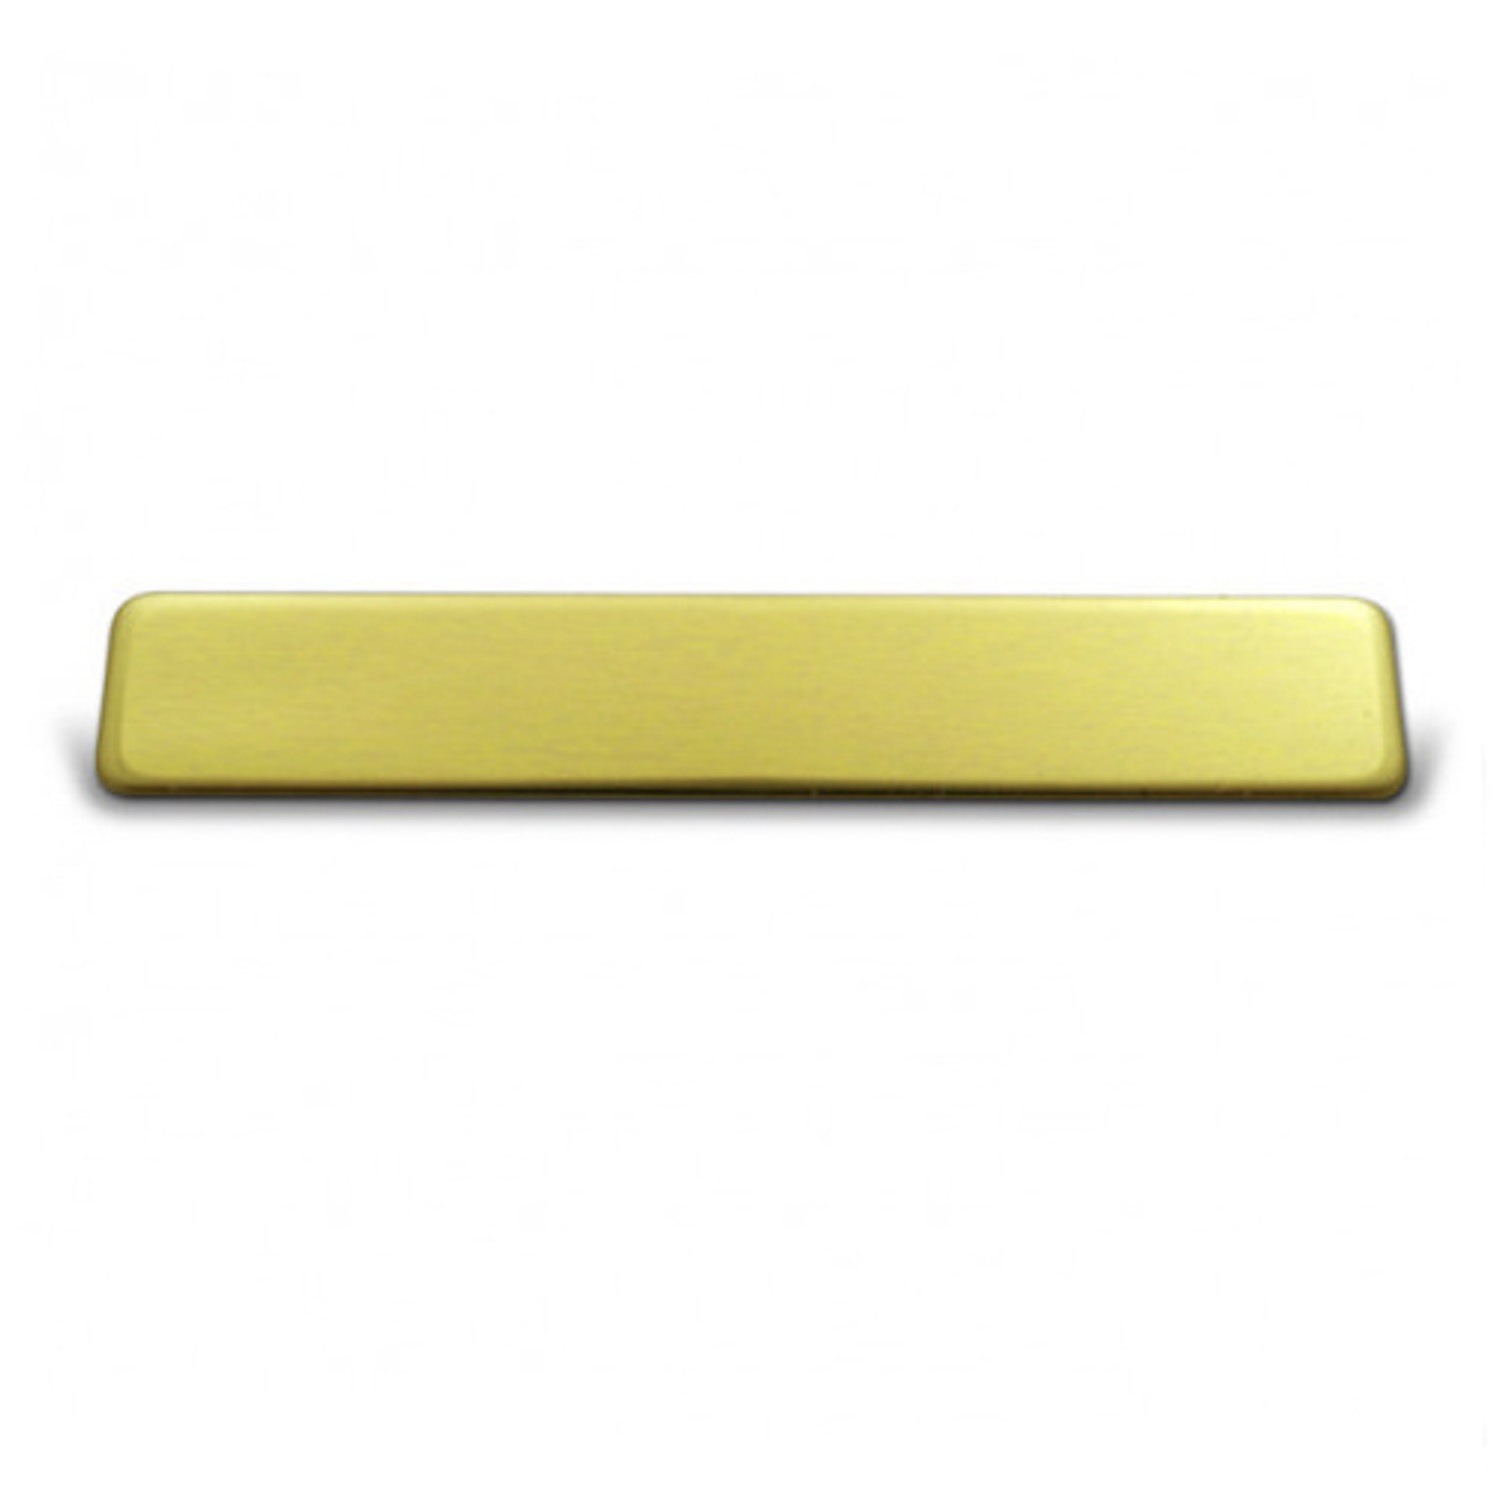 LAWPRO 1 LINE NAMEPLATE 2 1/2" X 5/8"